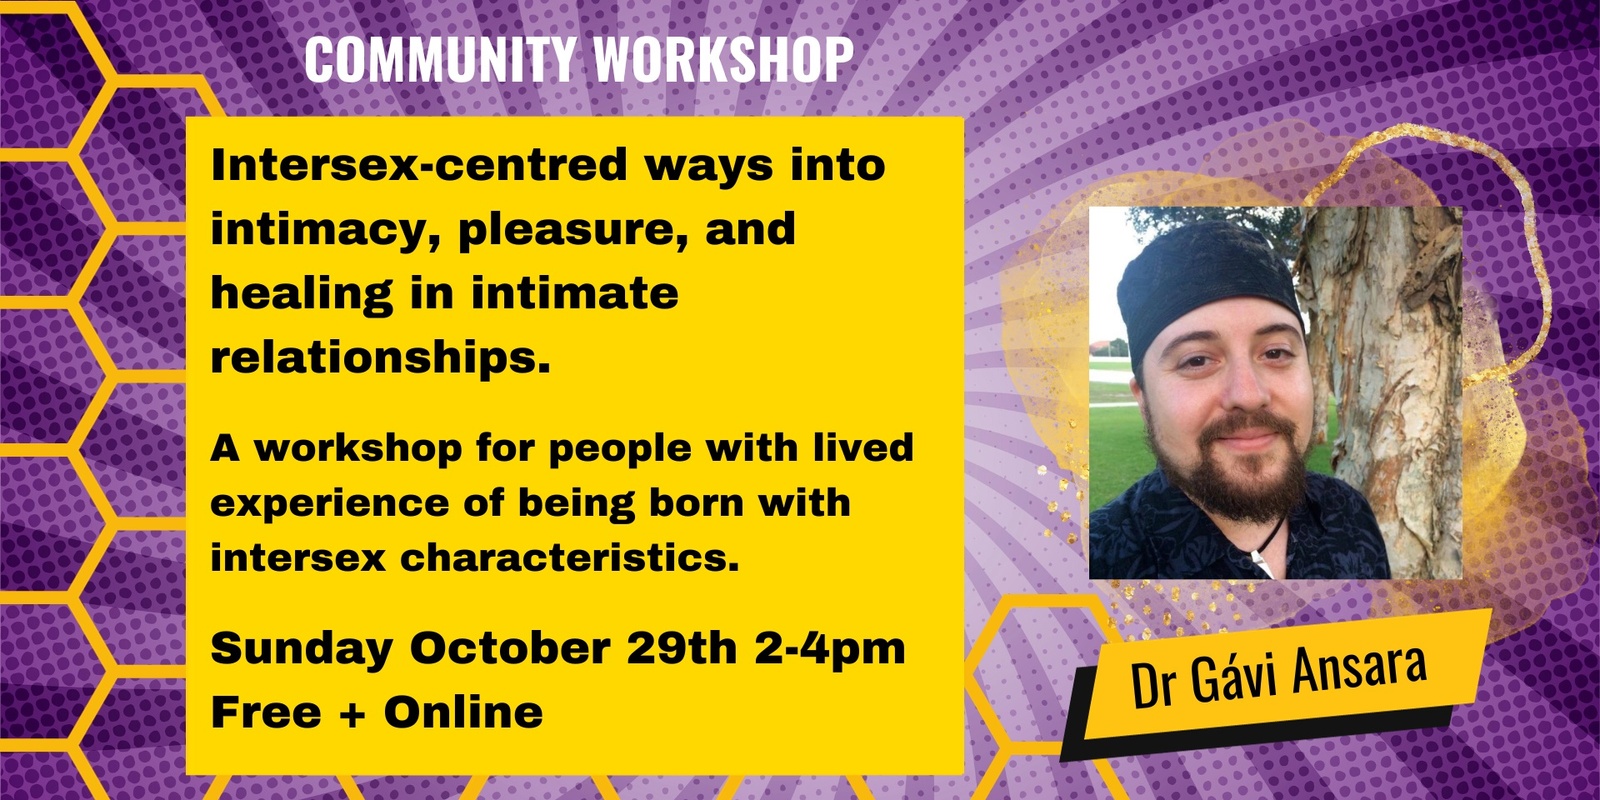 Banner image for Community Workshop with Dr Gávi - Intersex-centred ways into intimacy, pleasure, and healing.